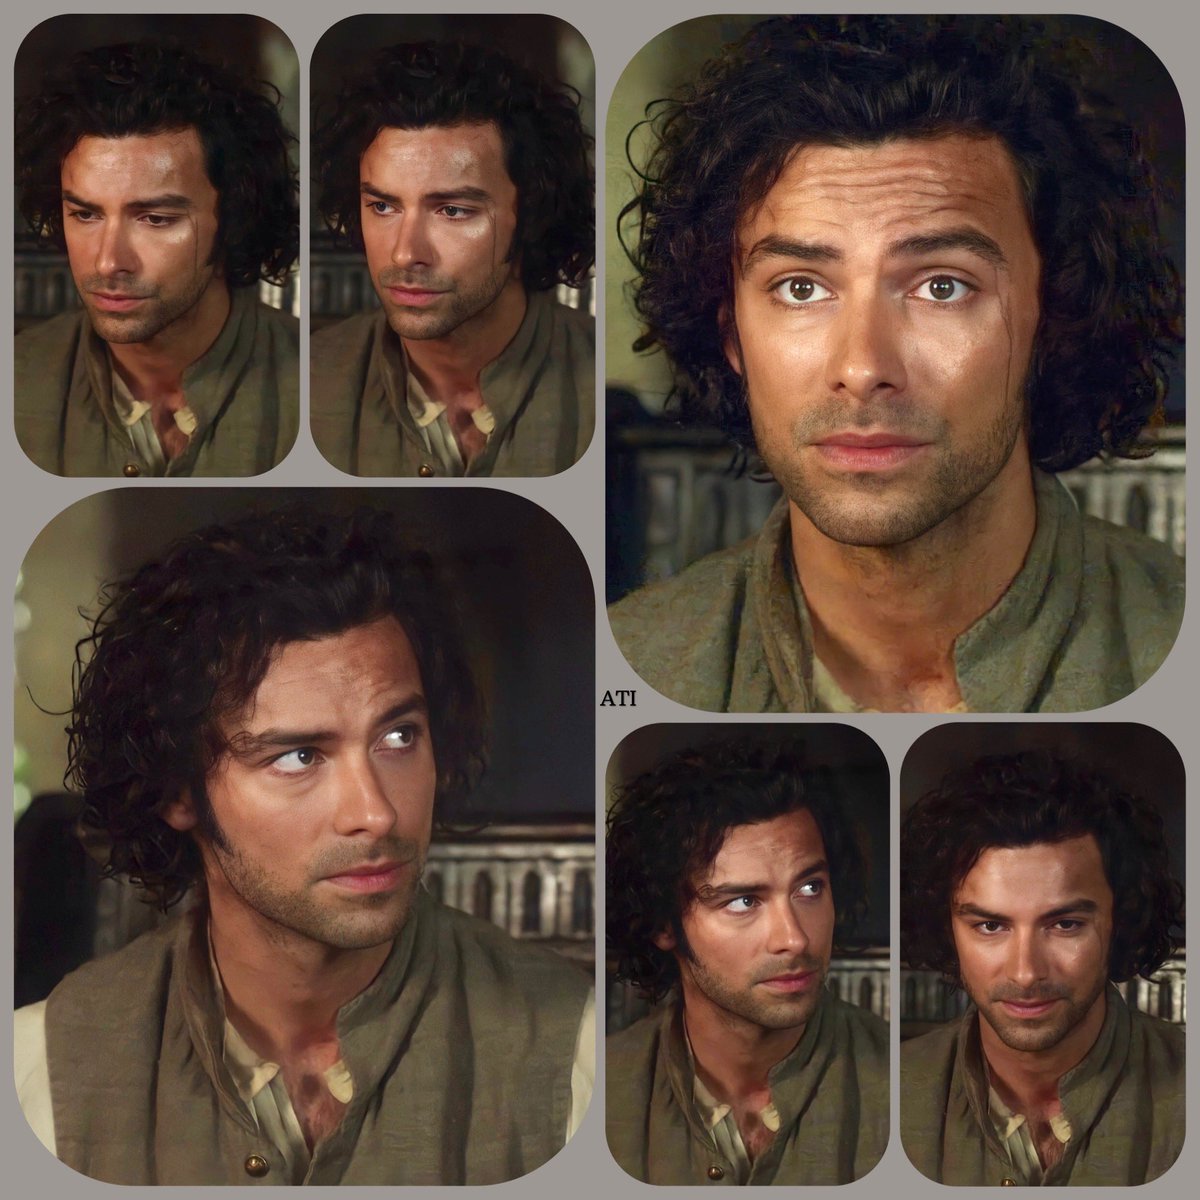 Aidan Turner 
Poldark 
Ross’s expressions are so cute 
He was so uncomfortable in front of Elisabeth
My screenshots and montage 
#Aidanturner #Aidanturnerlove #Poldark #Ross #Aidanturnerinternational